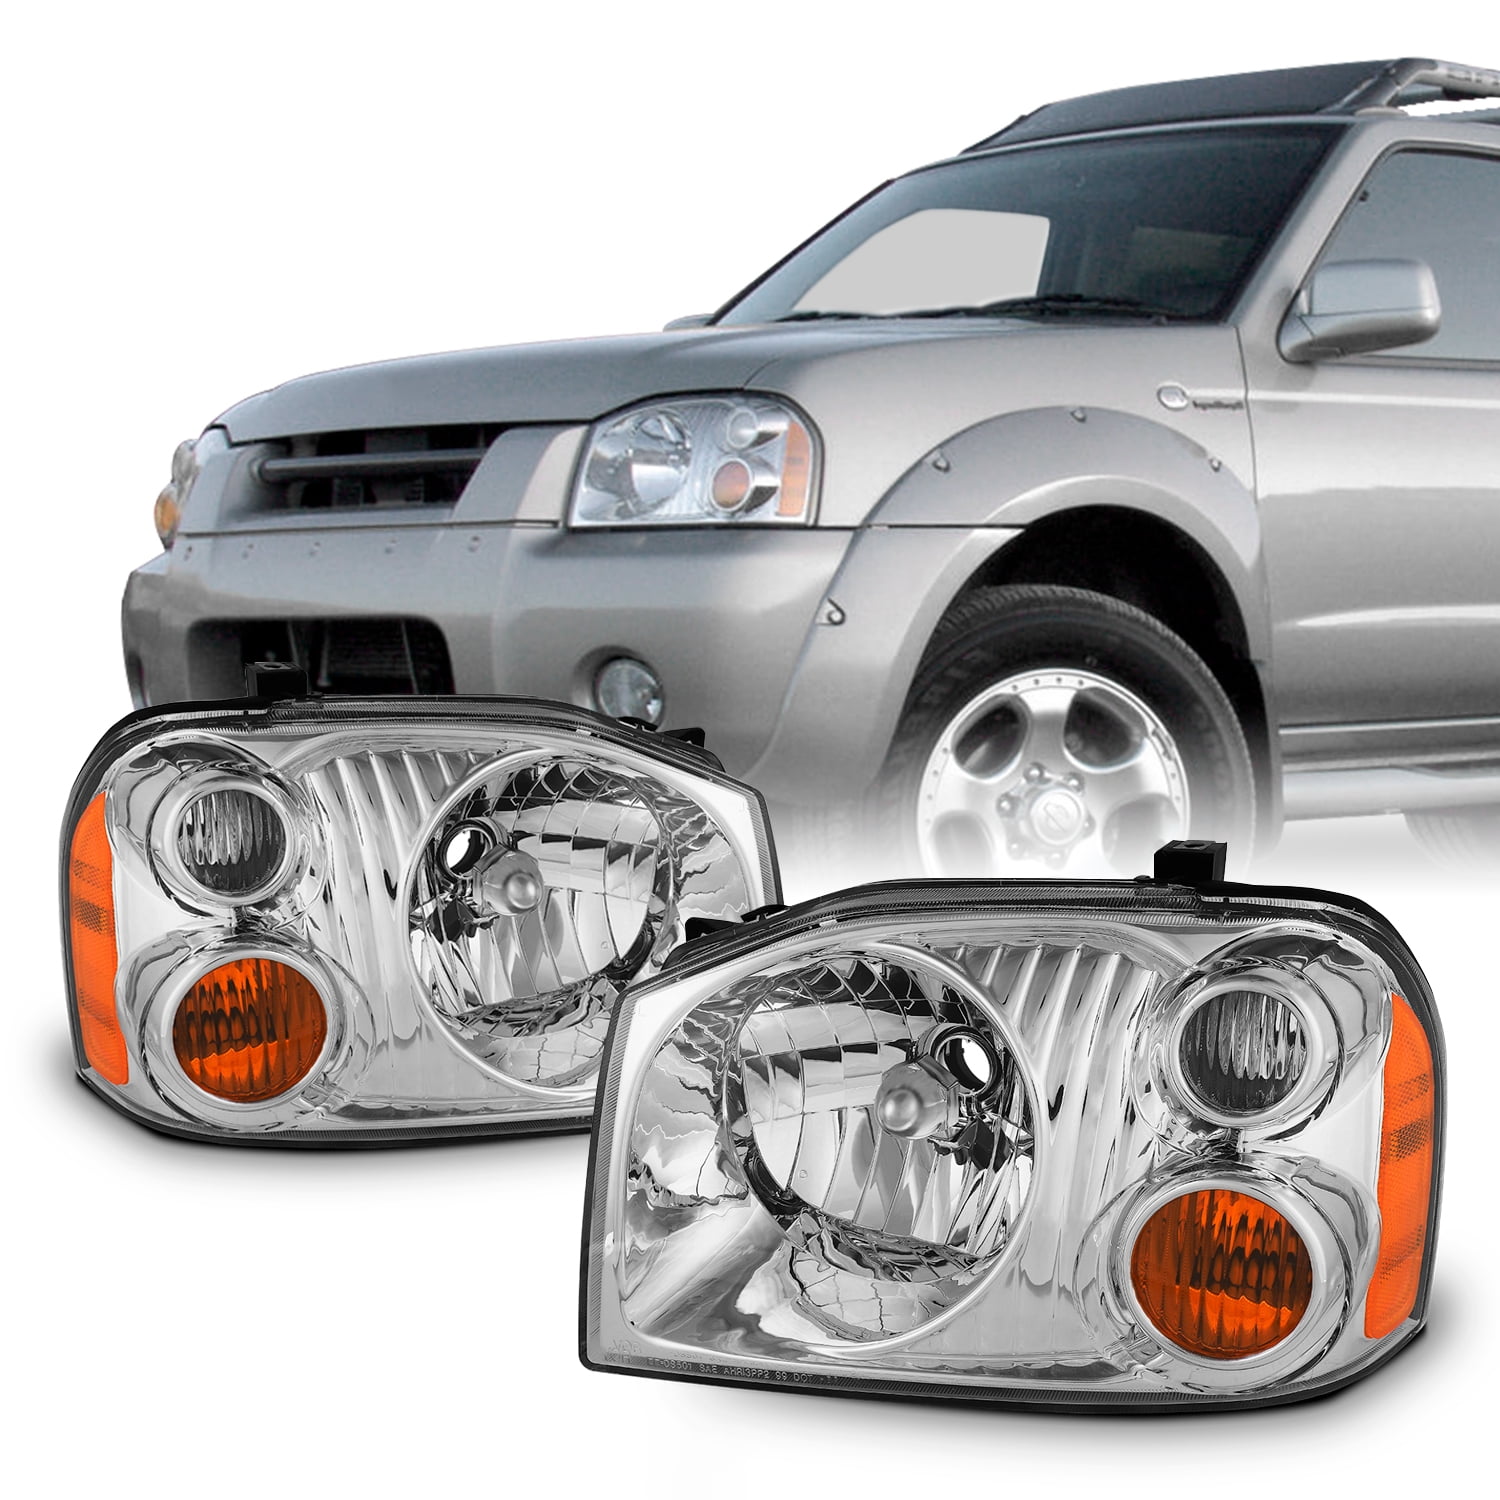 For Mercury Villager & Nissan Quest 1996-1998 Right Side Headlight